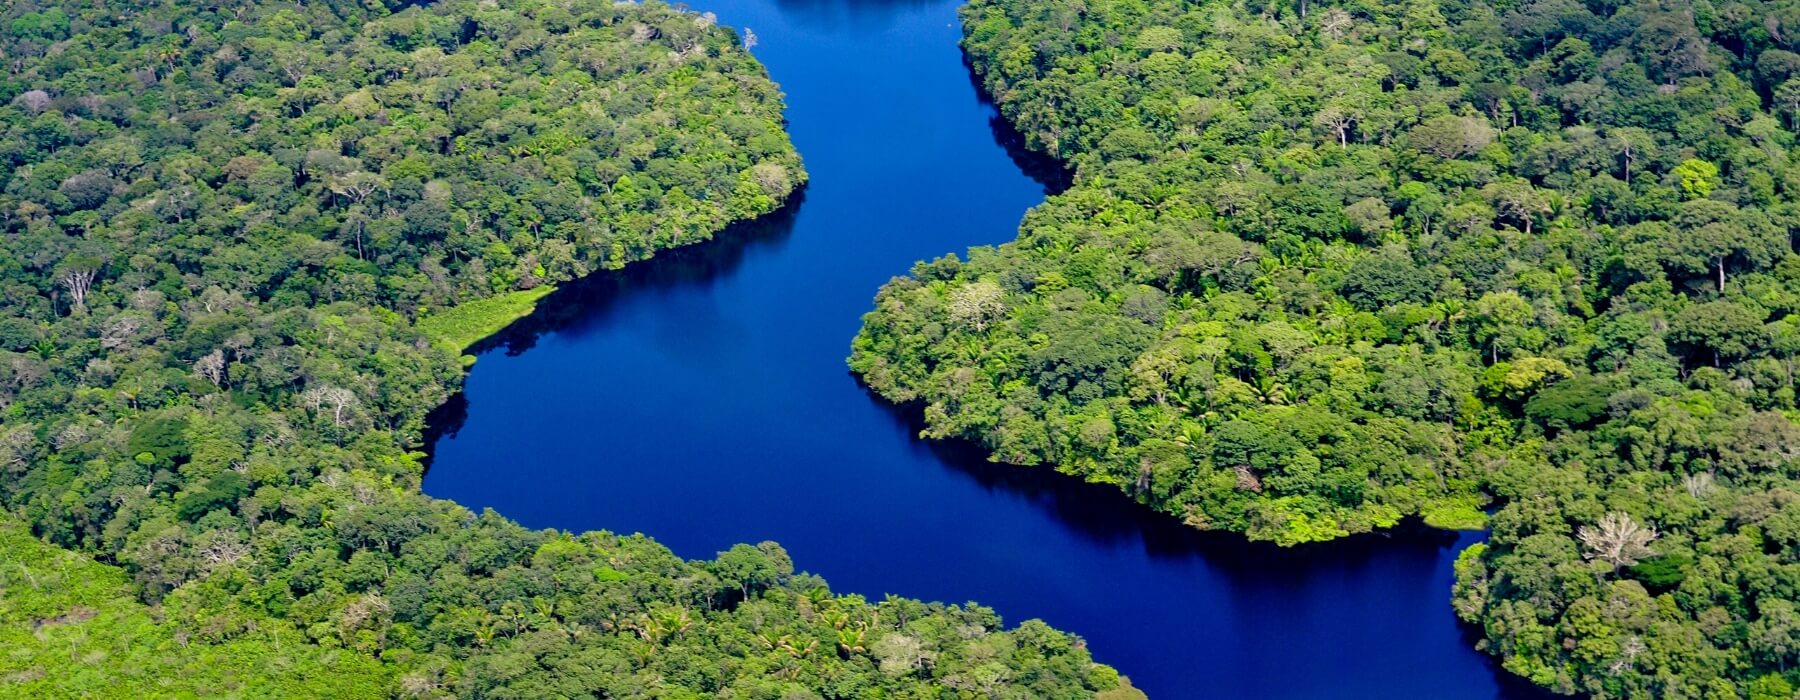 THE MOST AMAZING FACTS ABOUT THE AMAZON RAINFOREST